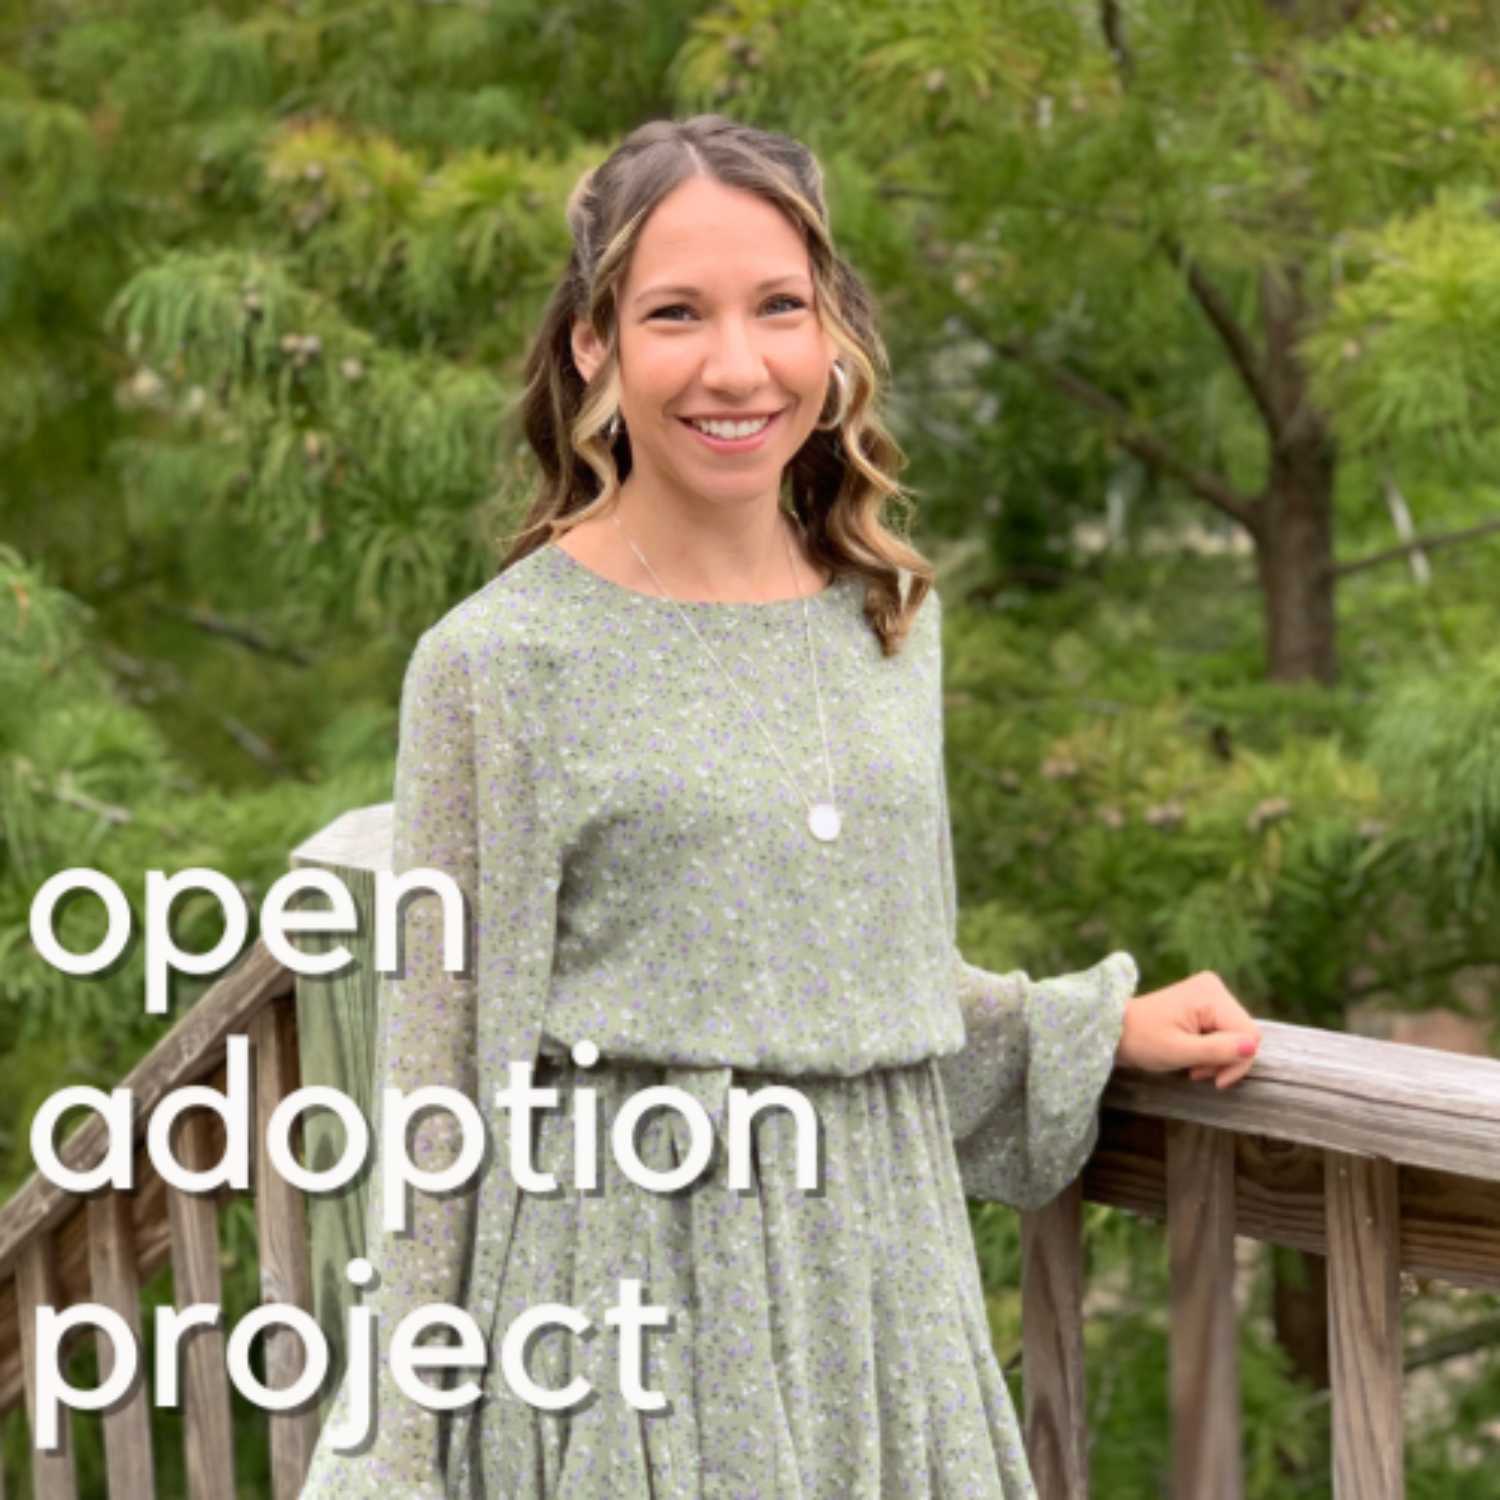 Building an Adoption Profile: A Birth Mom’s Tips